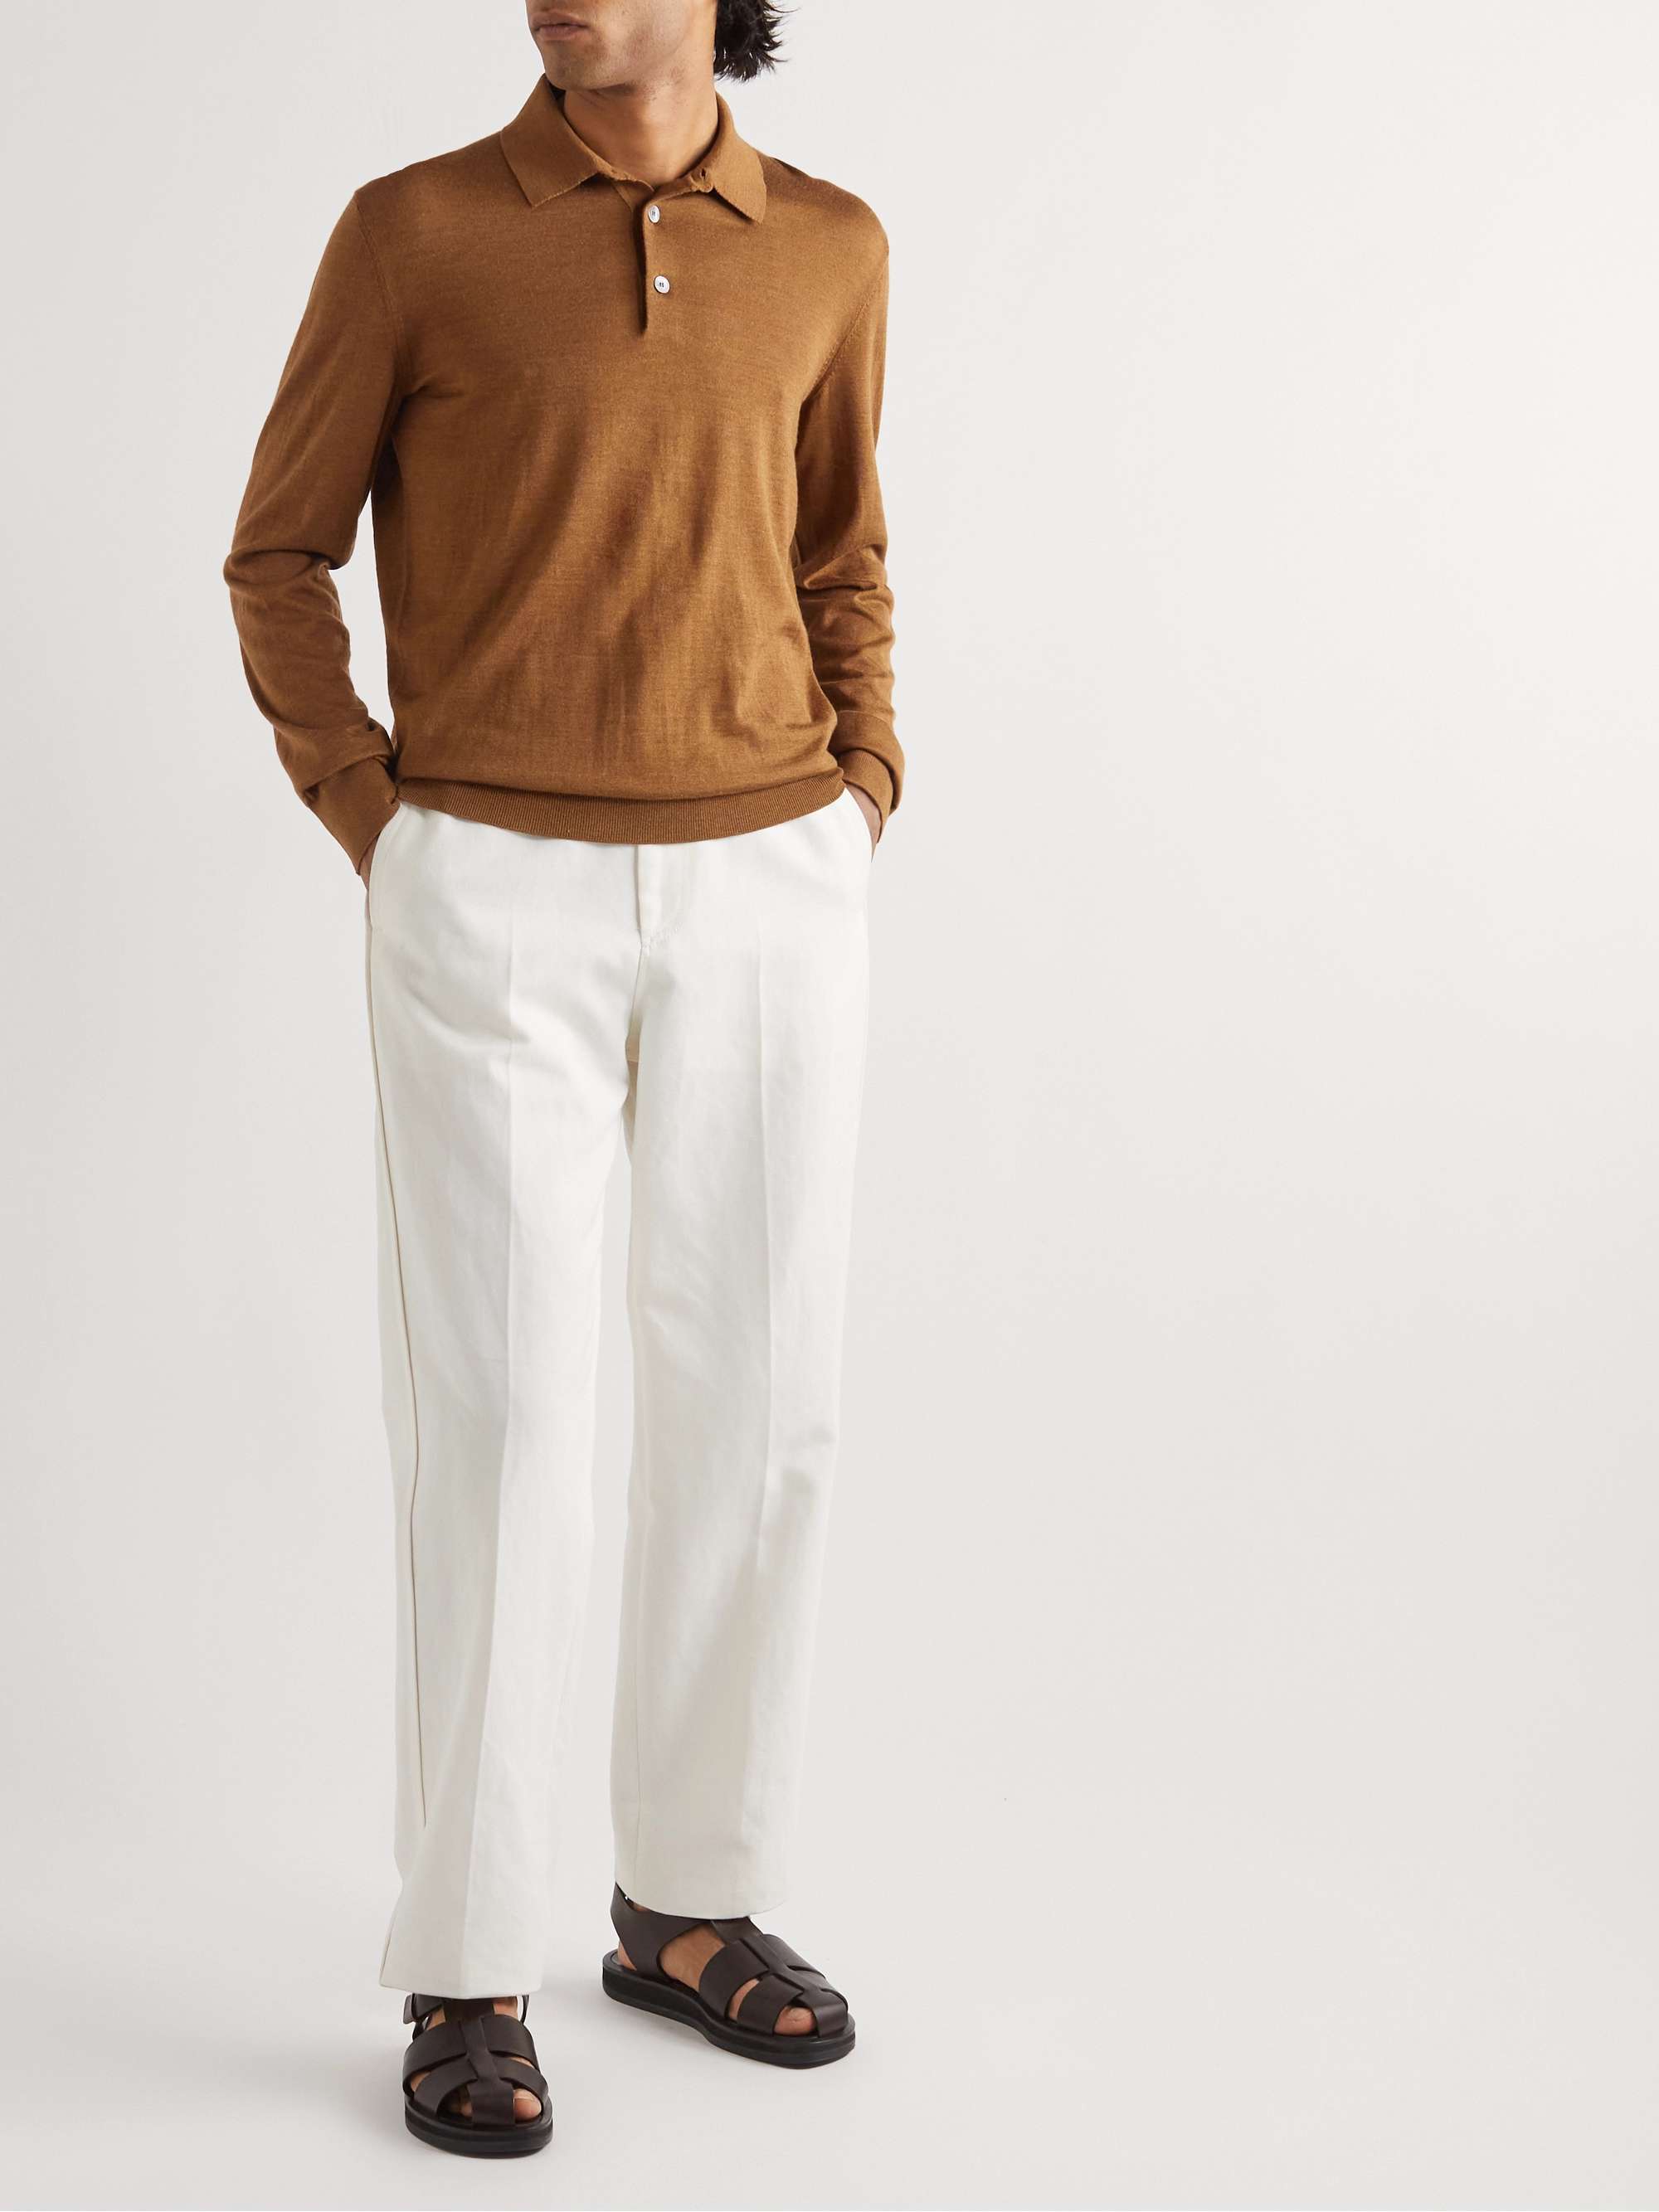 ZEGNA Ribbed Cashmere and Silk-Blend Polo Shirt